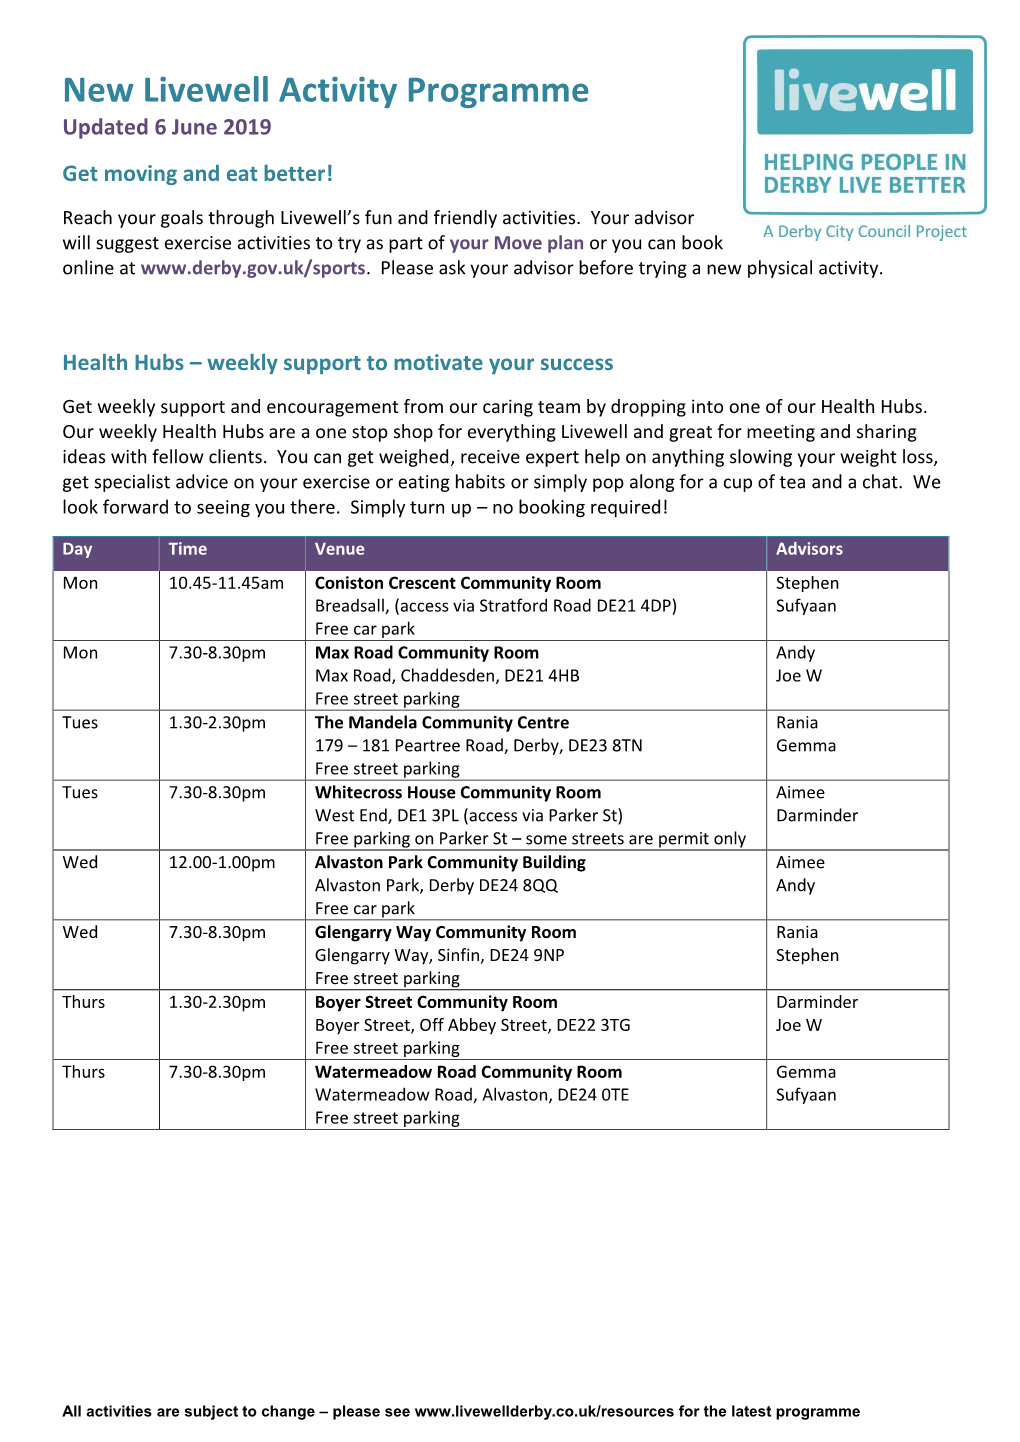 New Livewell Activity Programme Updated 6 June 2019 Get Moving and Eat Better!